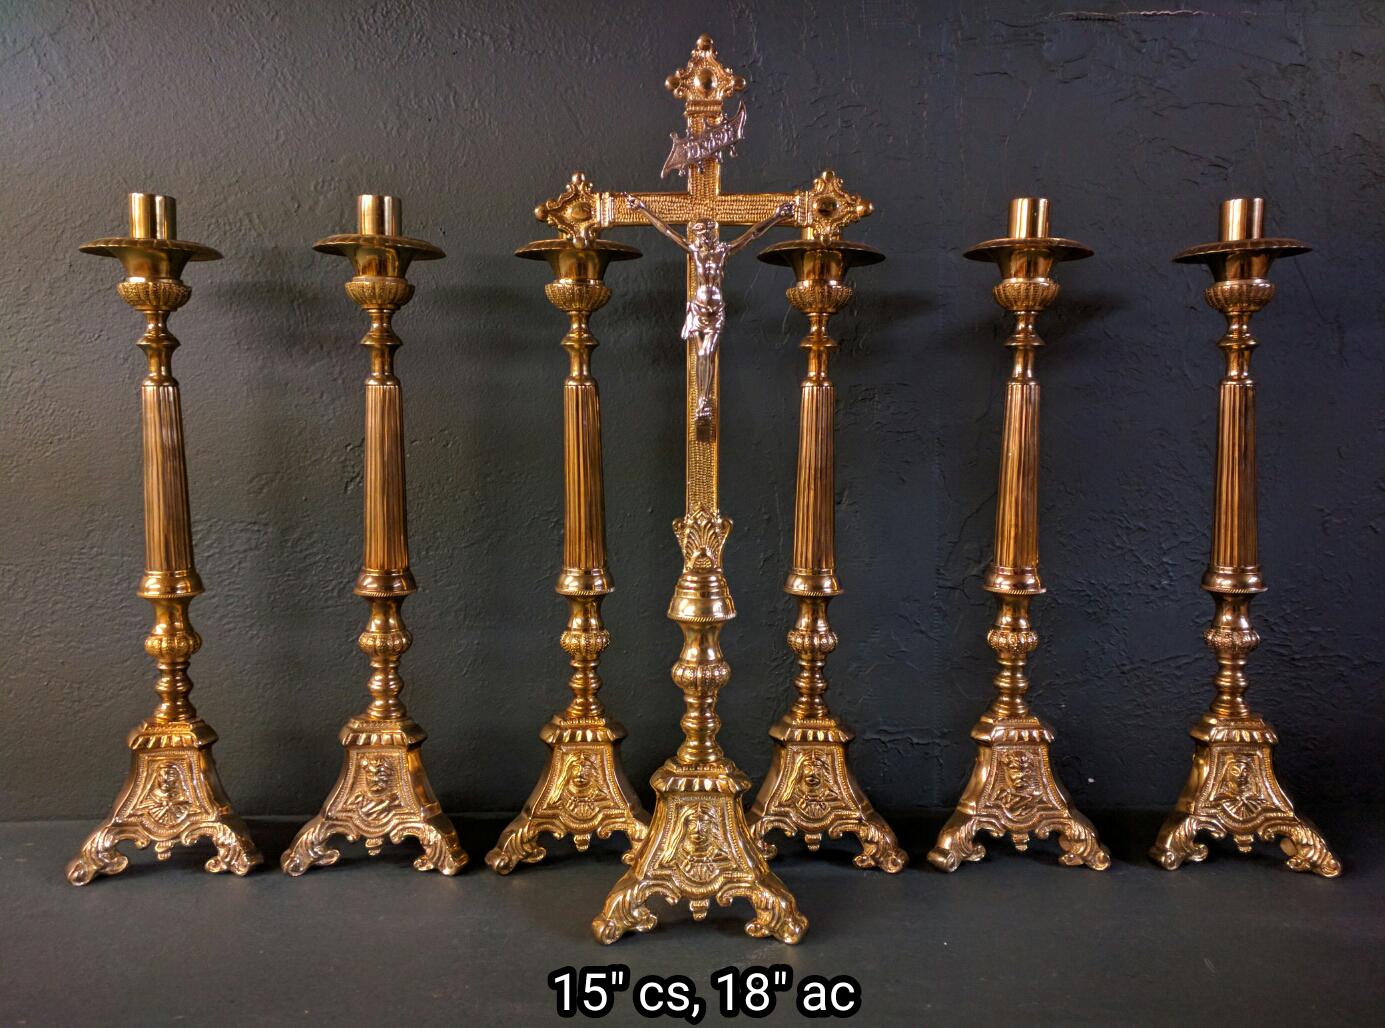 Details about   N.G Brass Ornate Sanctuary Votive Candle Holder for Church Supplies 5 1/2 In 